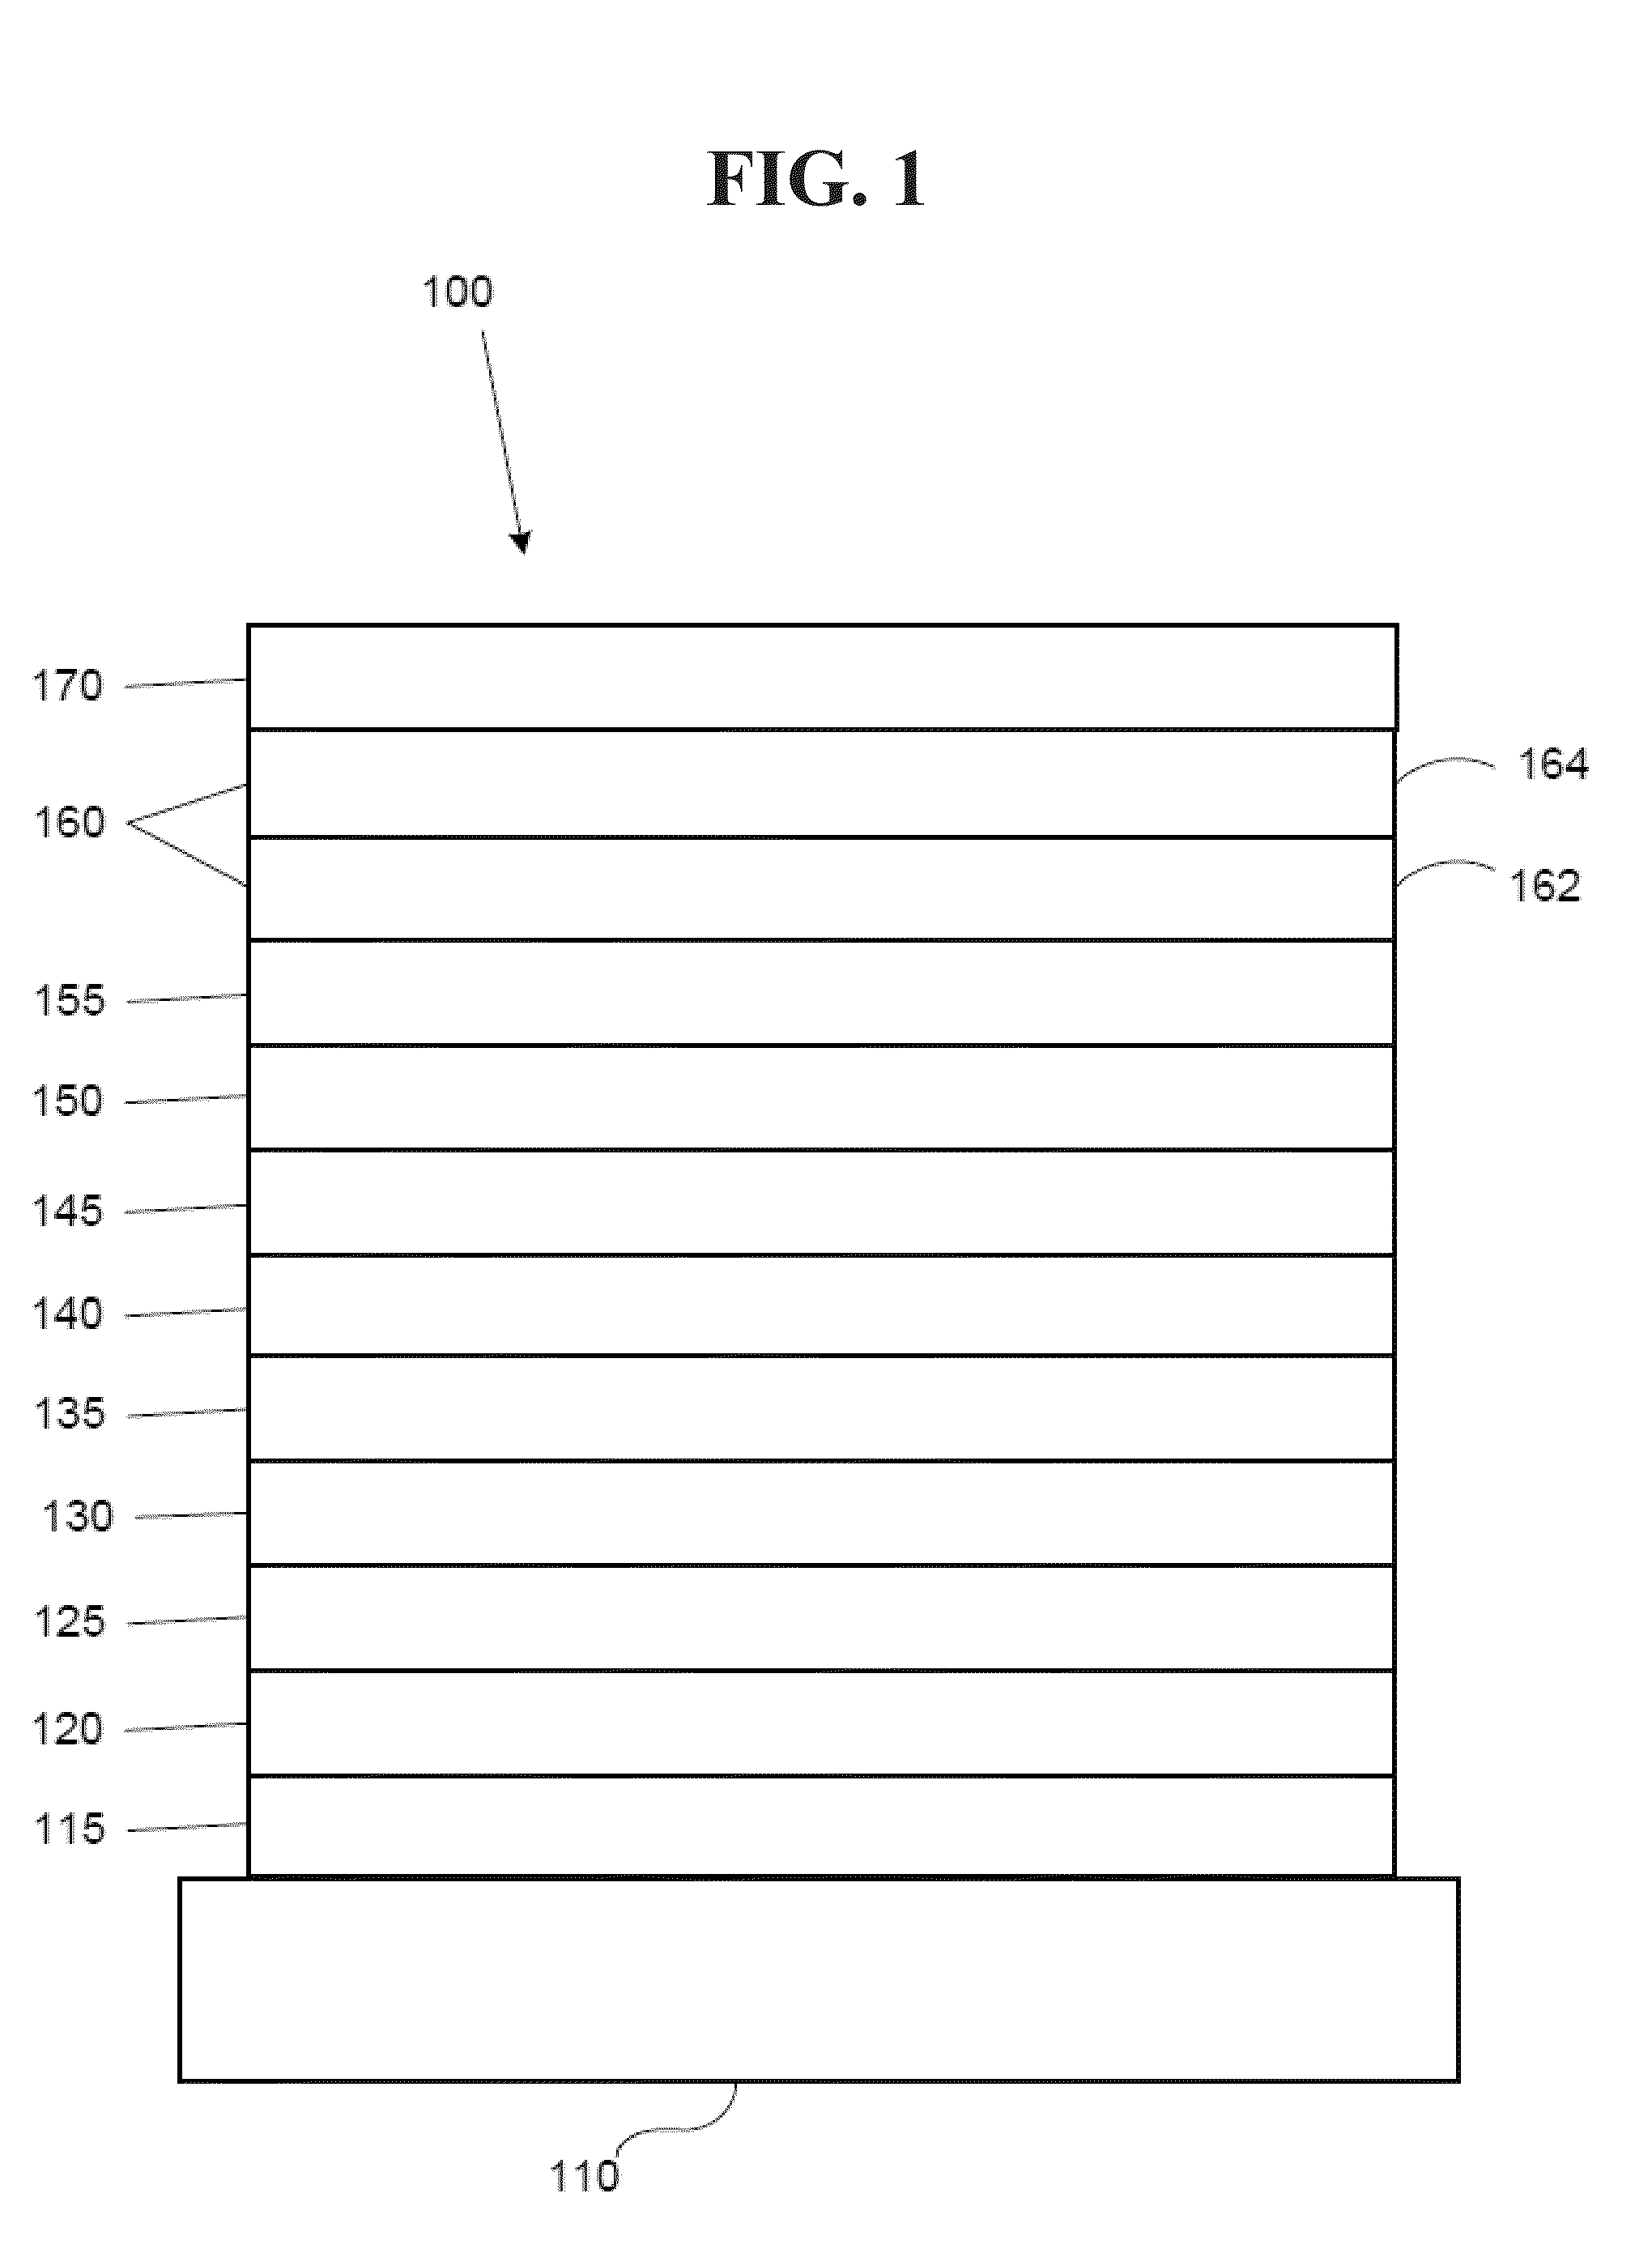 Systems and methods of modulating flow during vapor jet deposition of organic materials